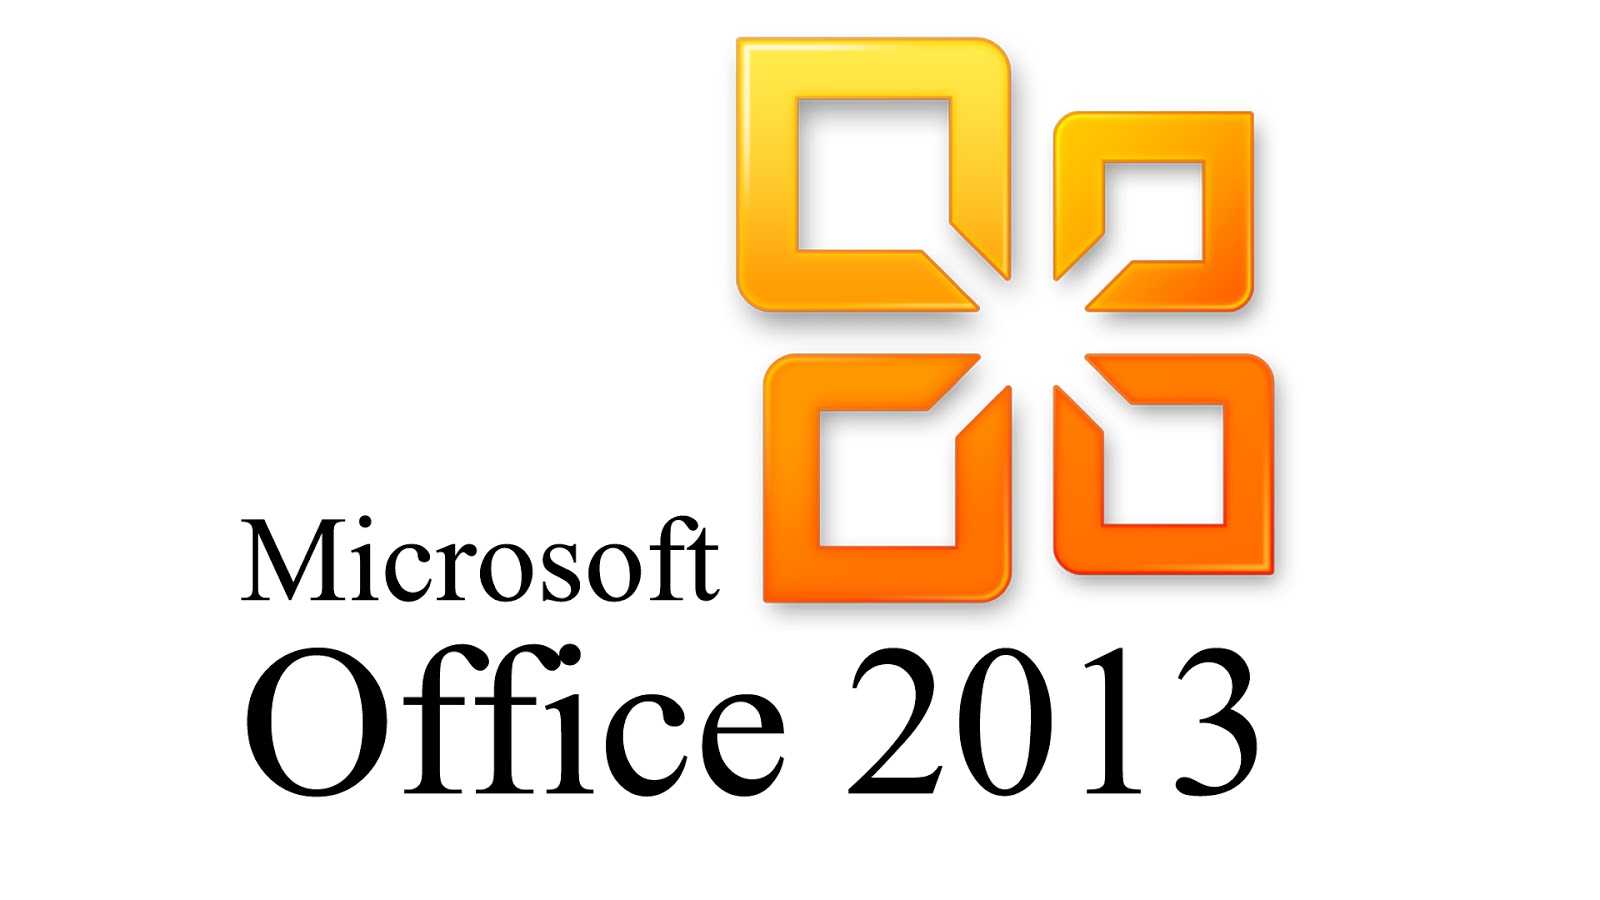 Ms office 2013 for mac free. download full version